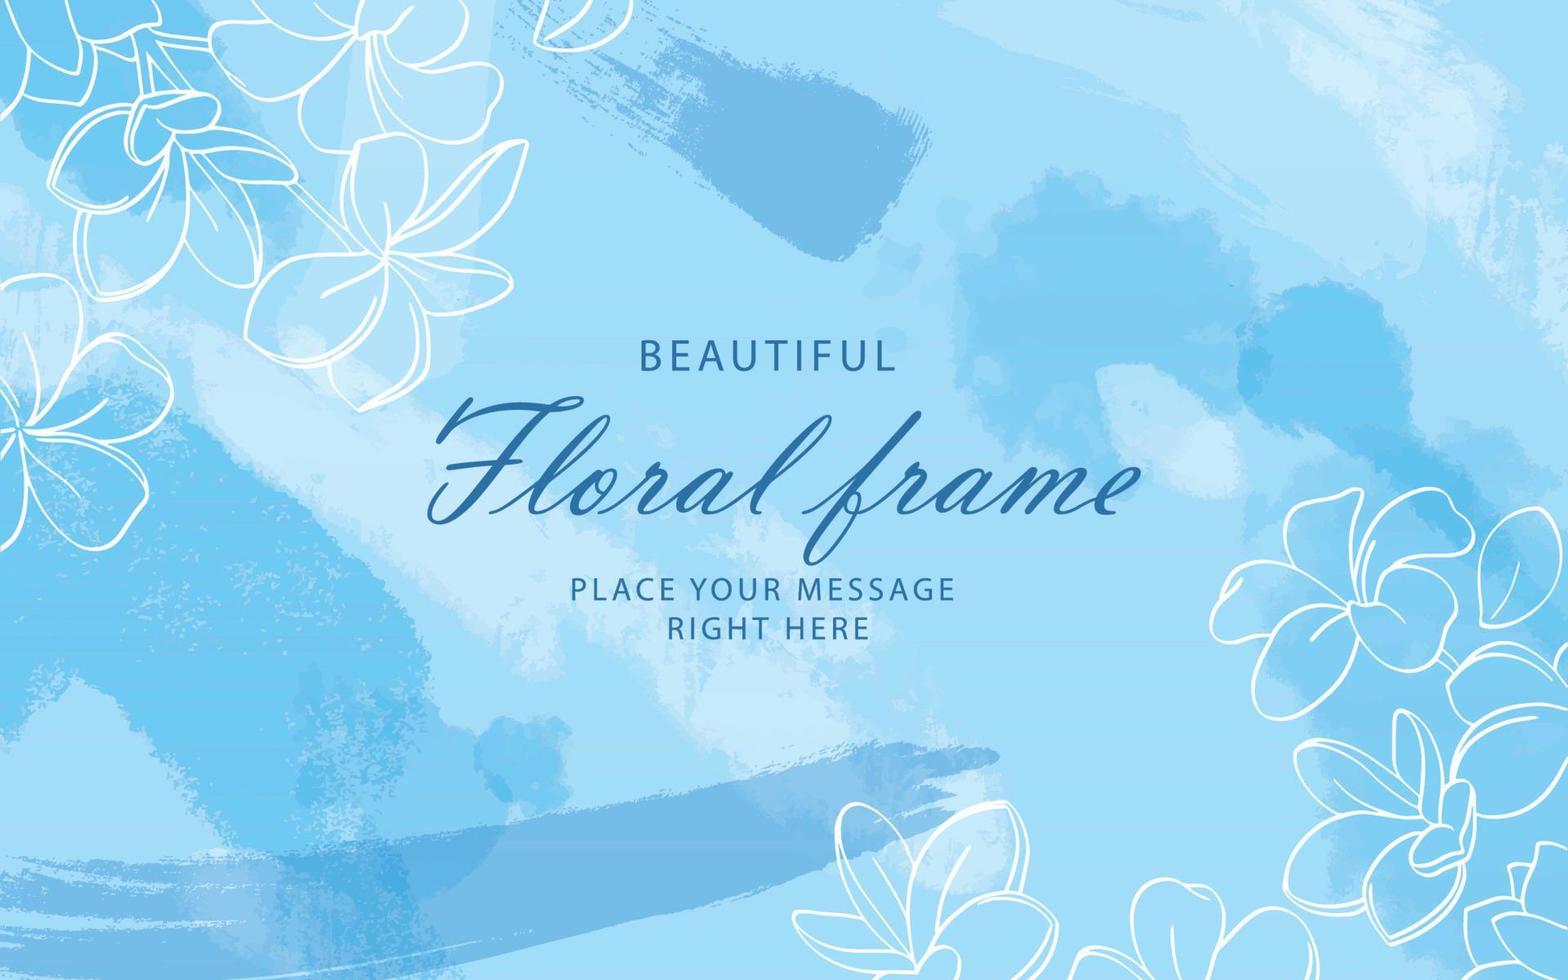 White flowers on watercolor background with quote vector